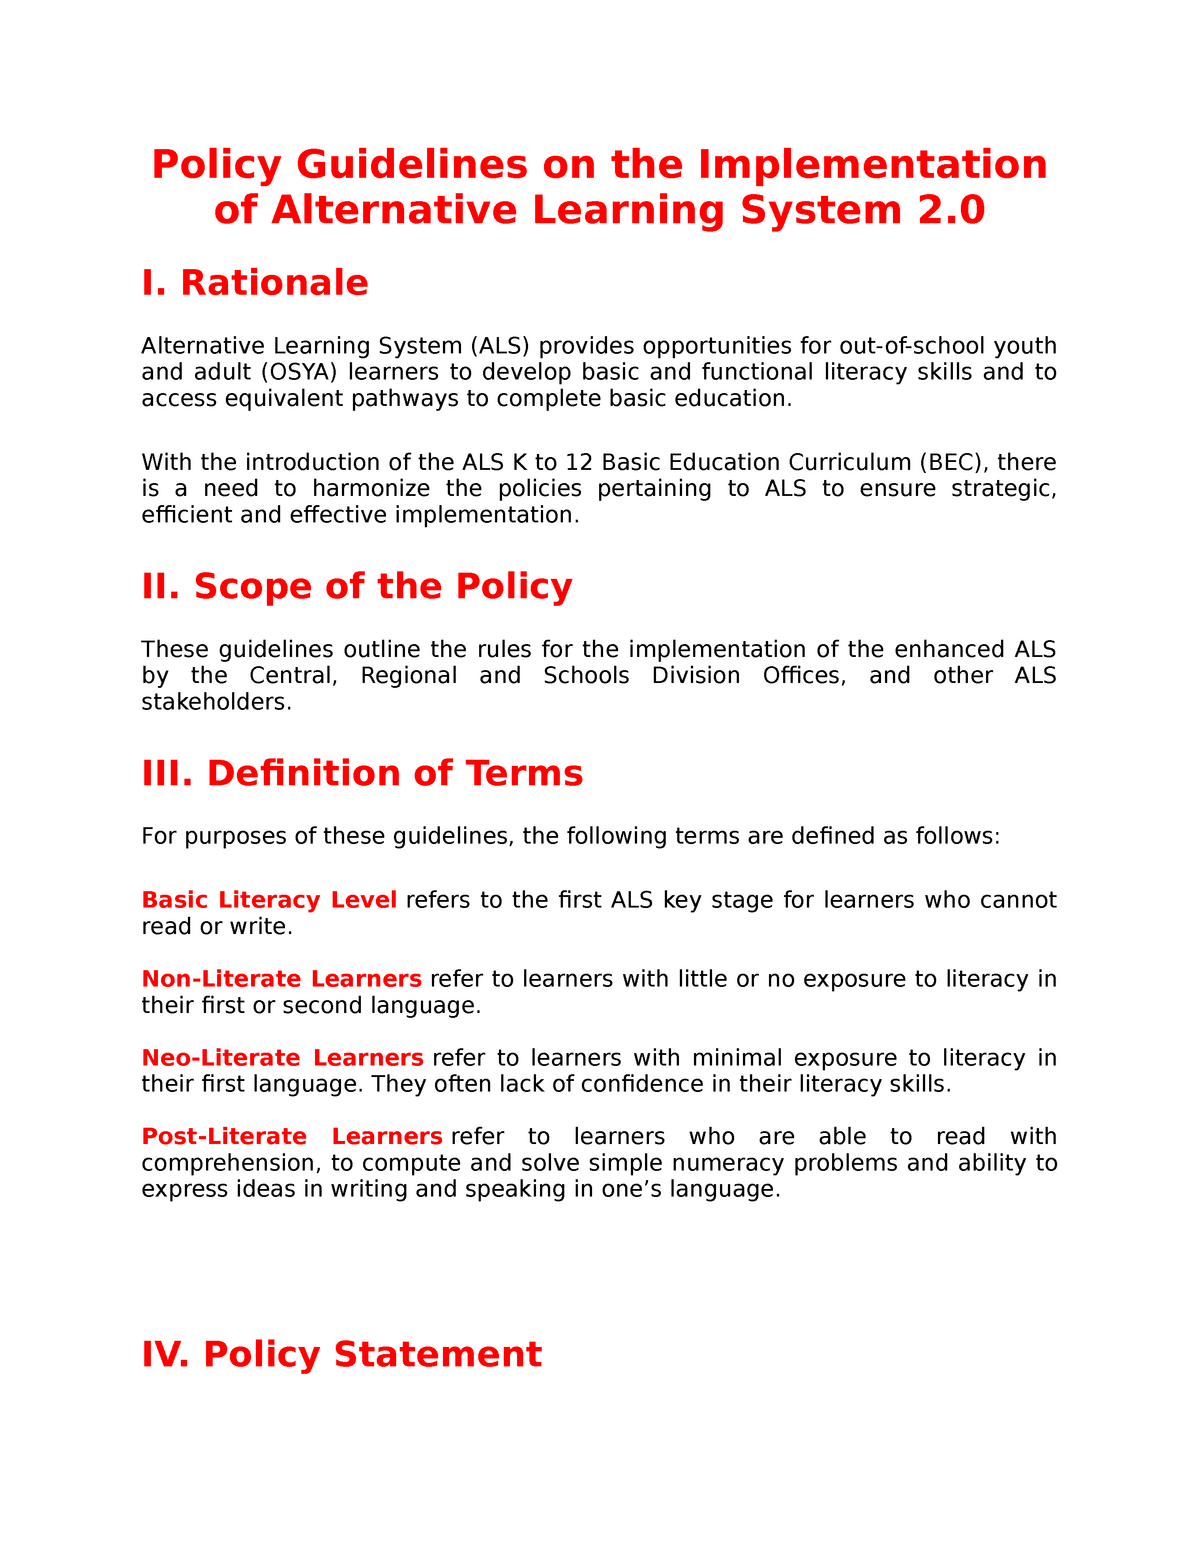 research title about alternative learning system